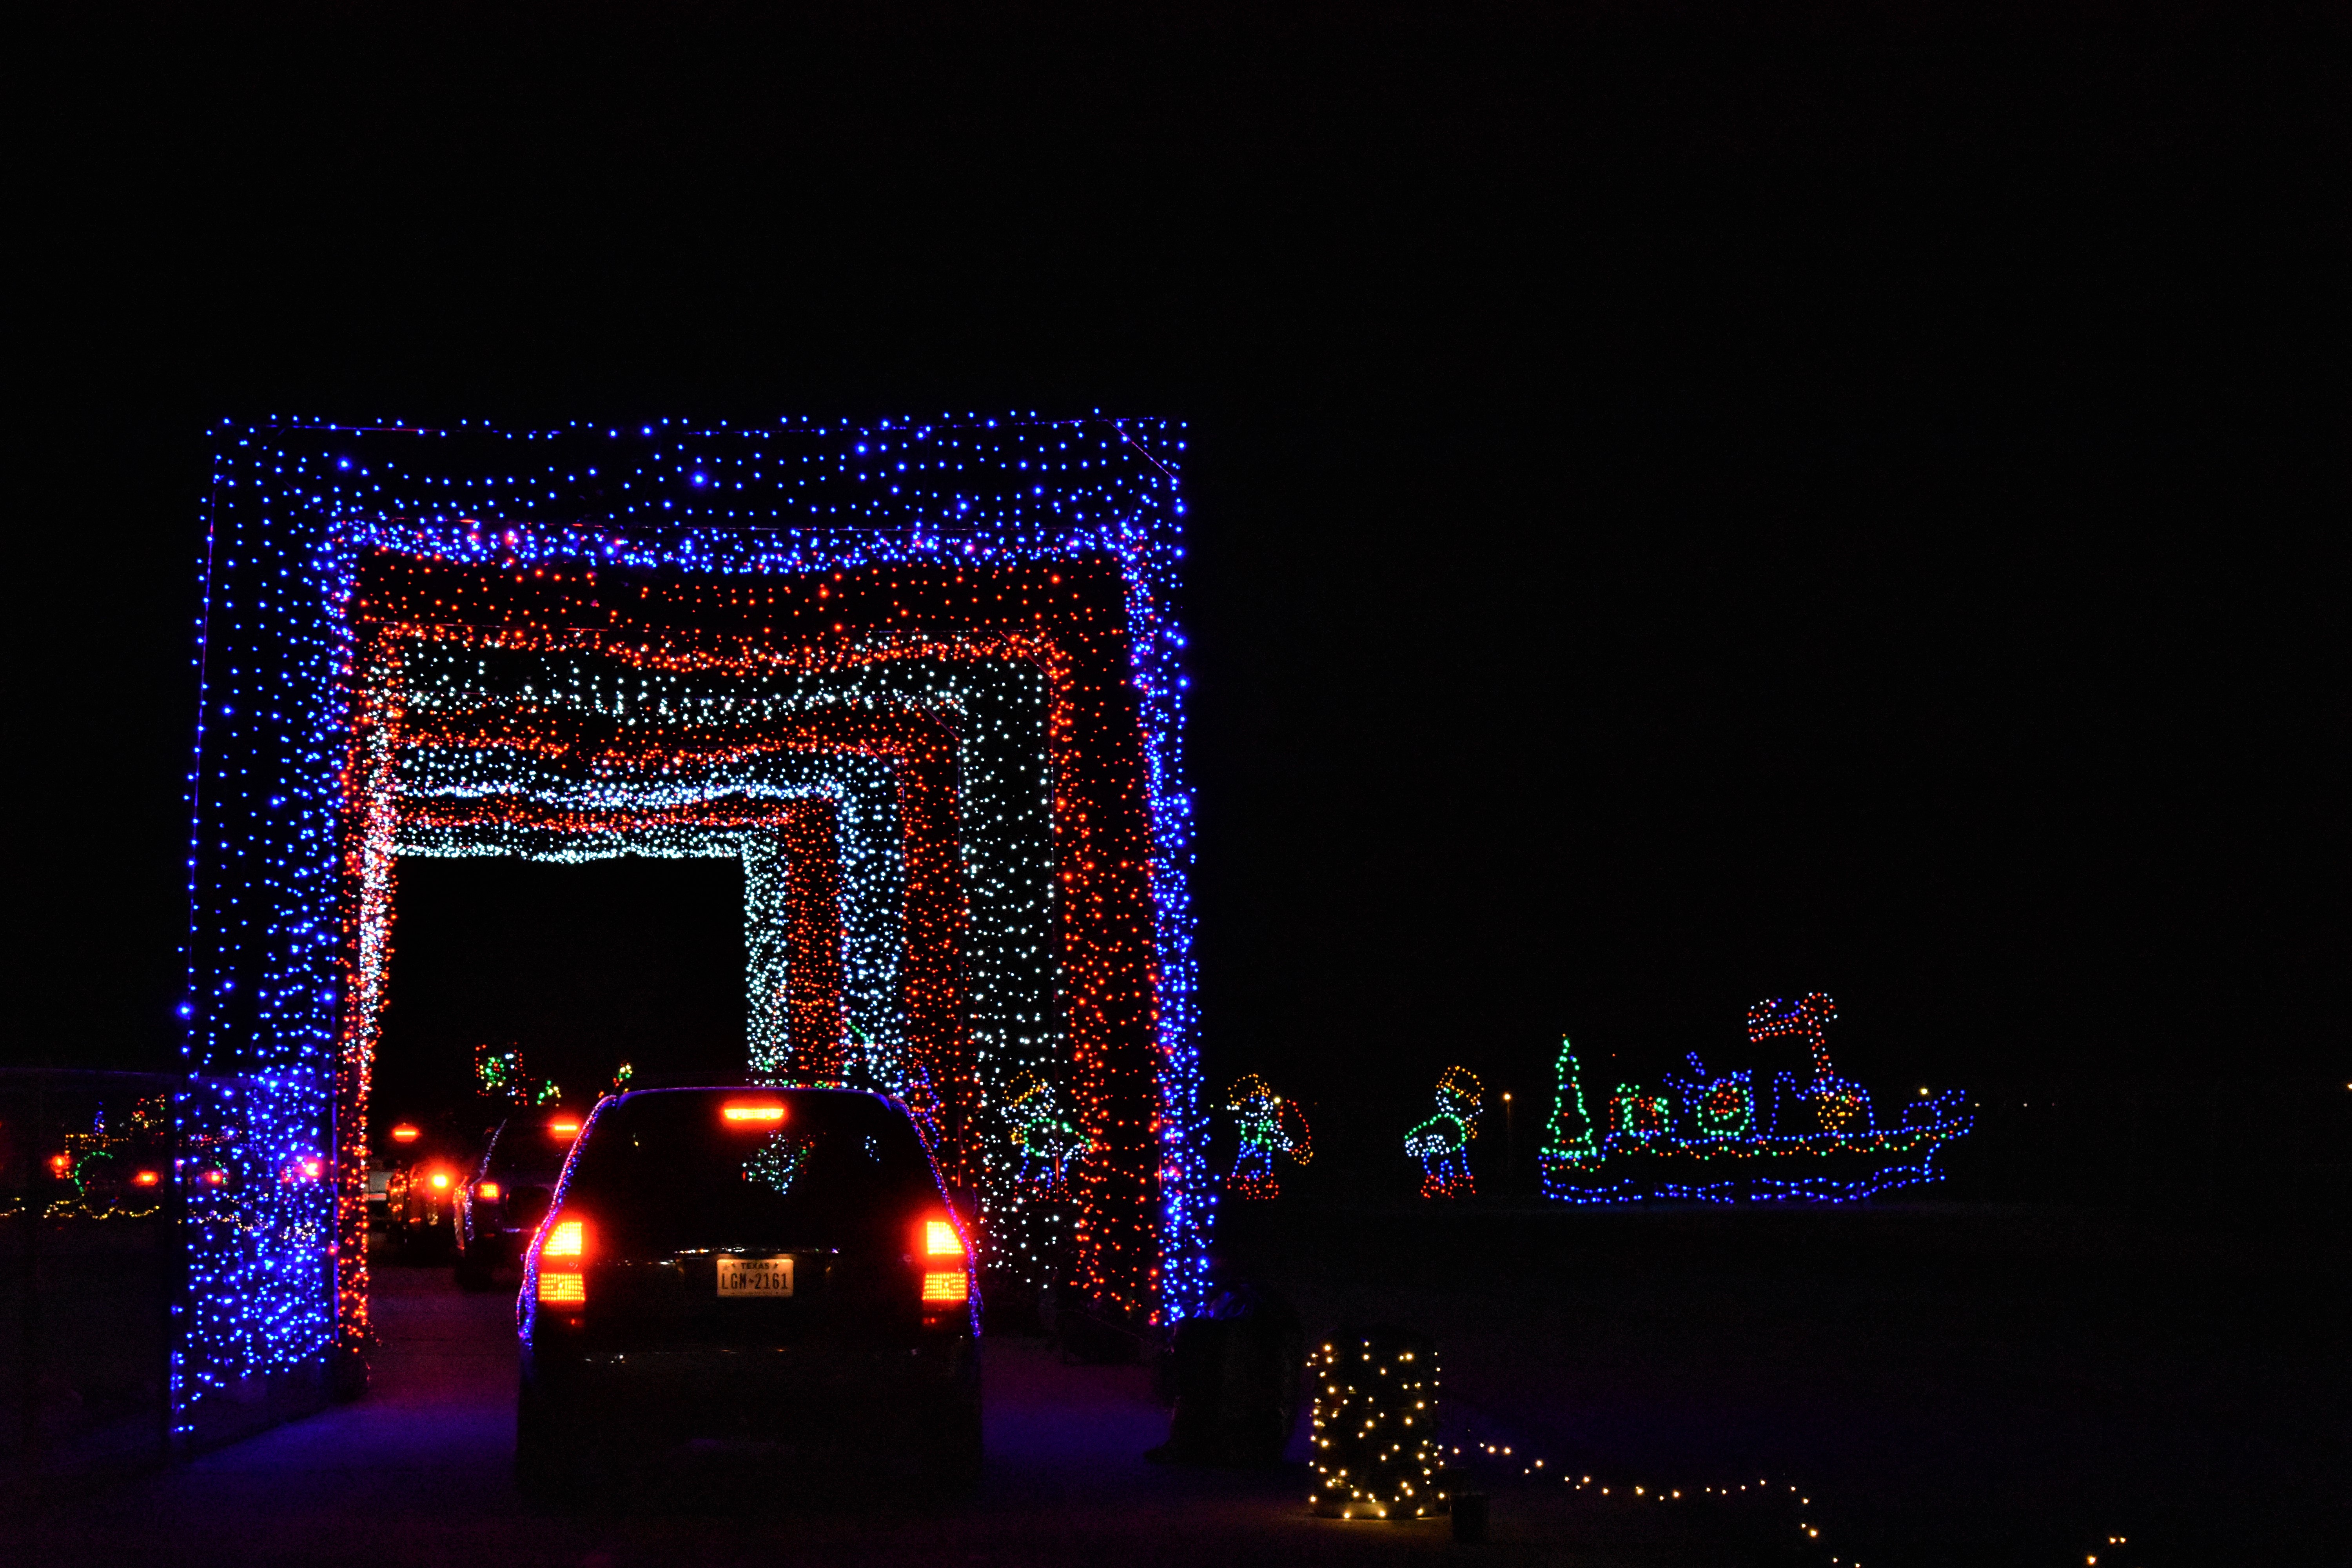 A look inside the Potawatomi Zoo during Gift of Lights